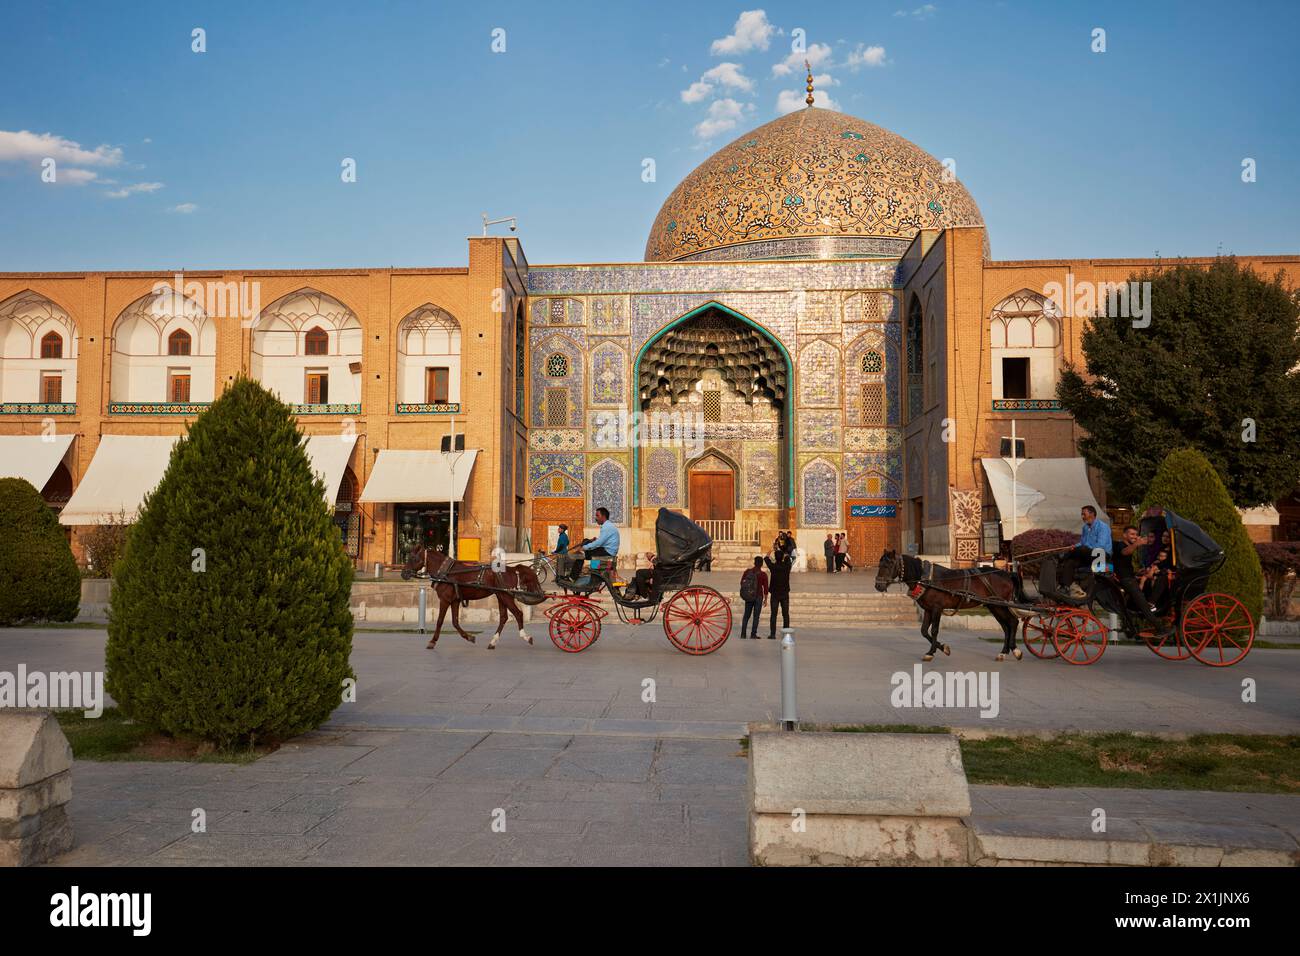 Horse drawn carriagees pass in front of the Lotfollah Mosque in Naqsh-e Jahan Square. Isfahan, Iran. Stock Photo